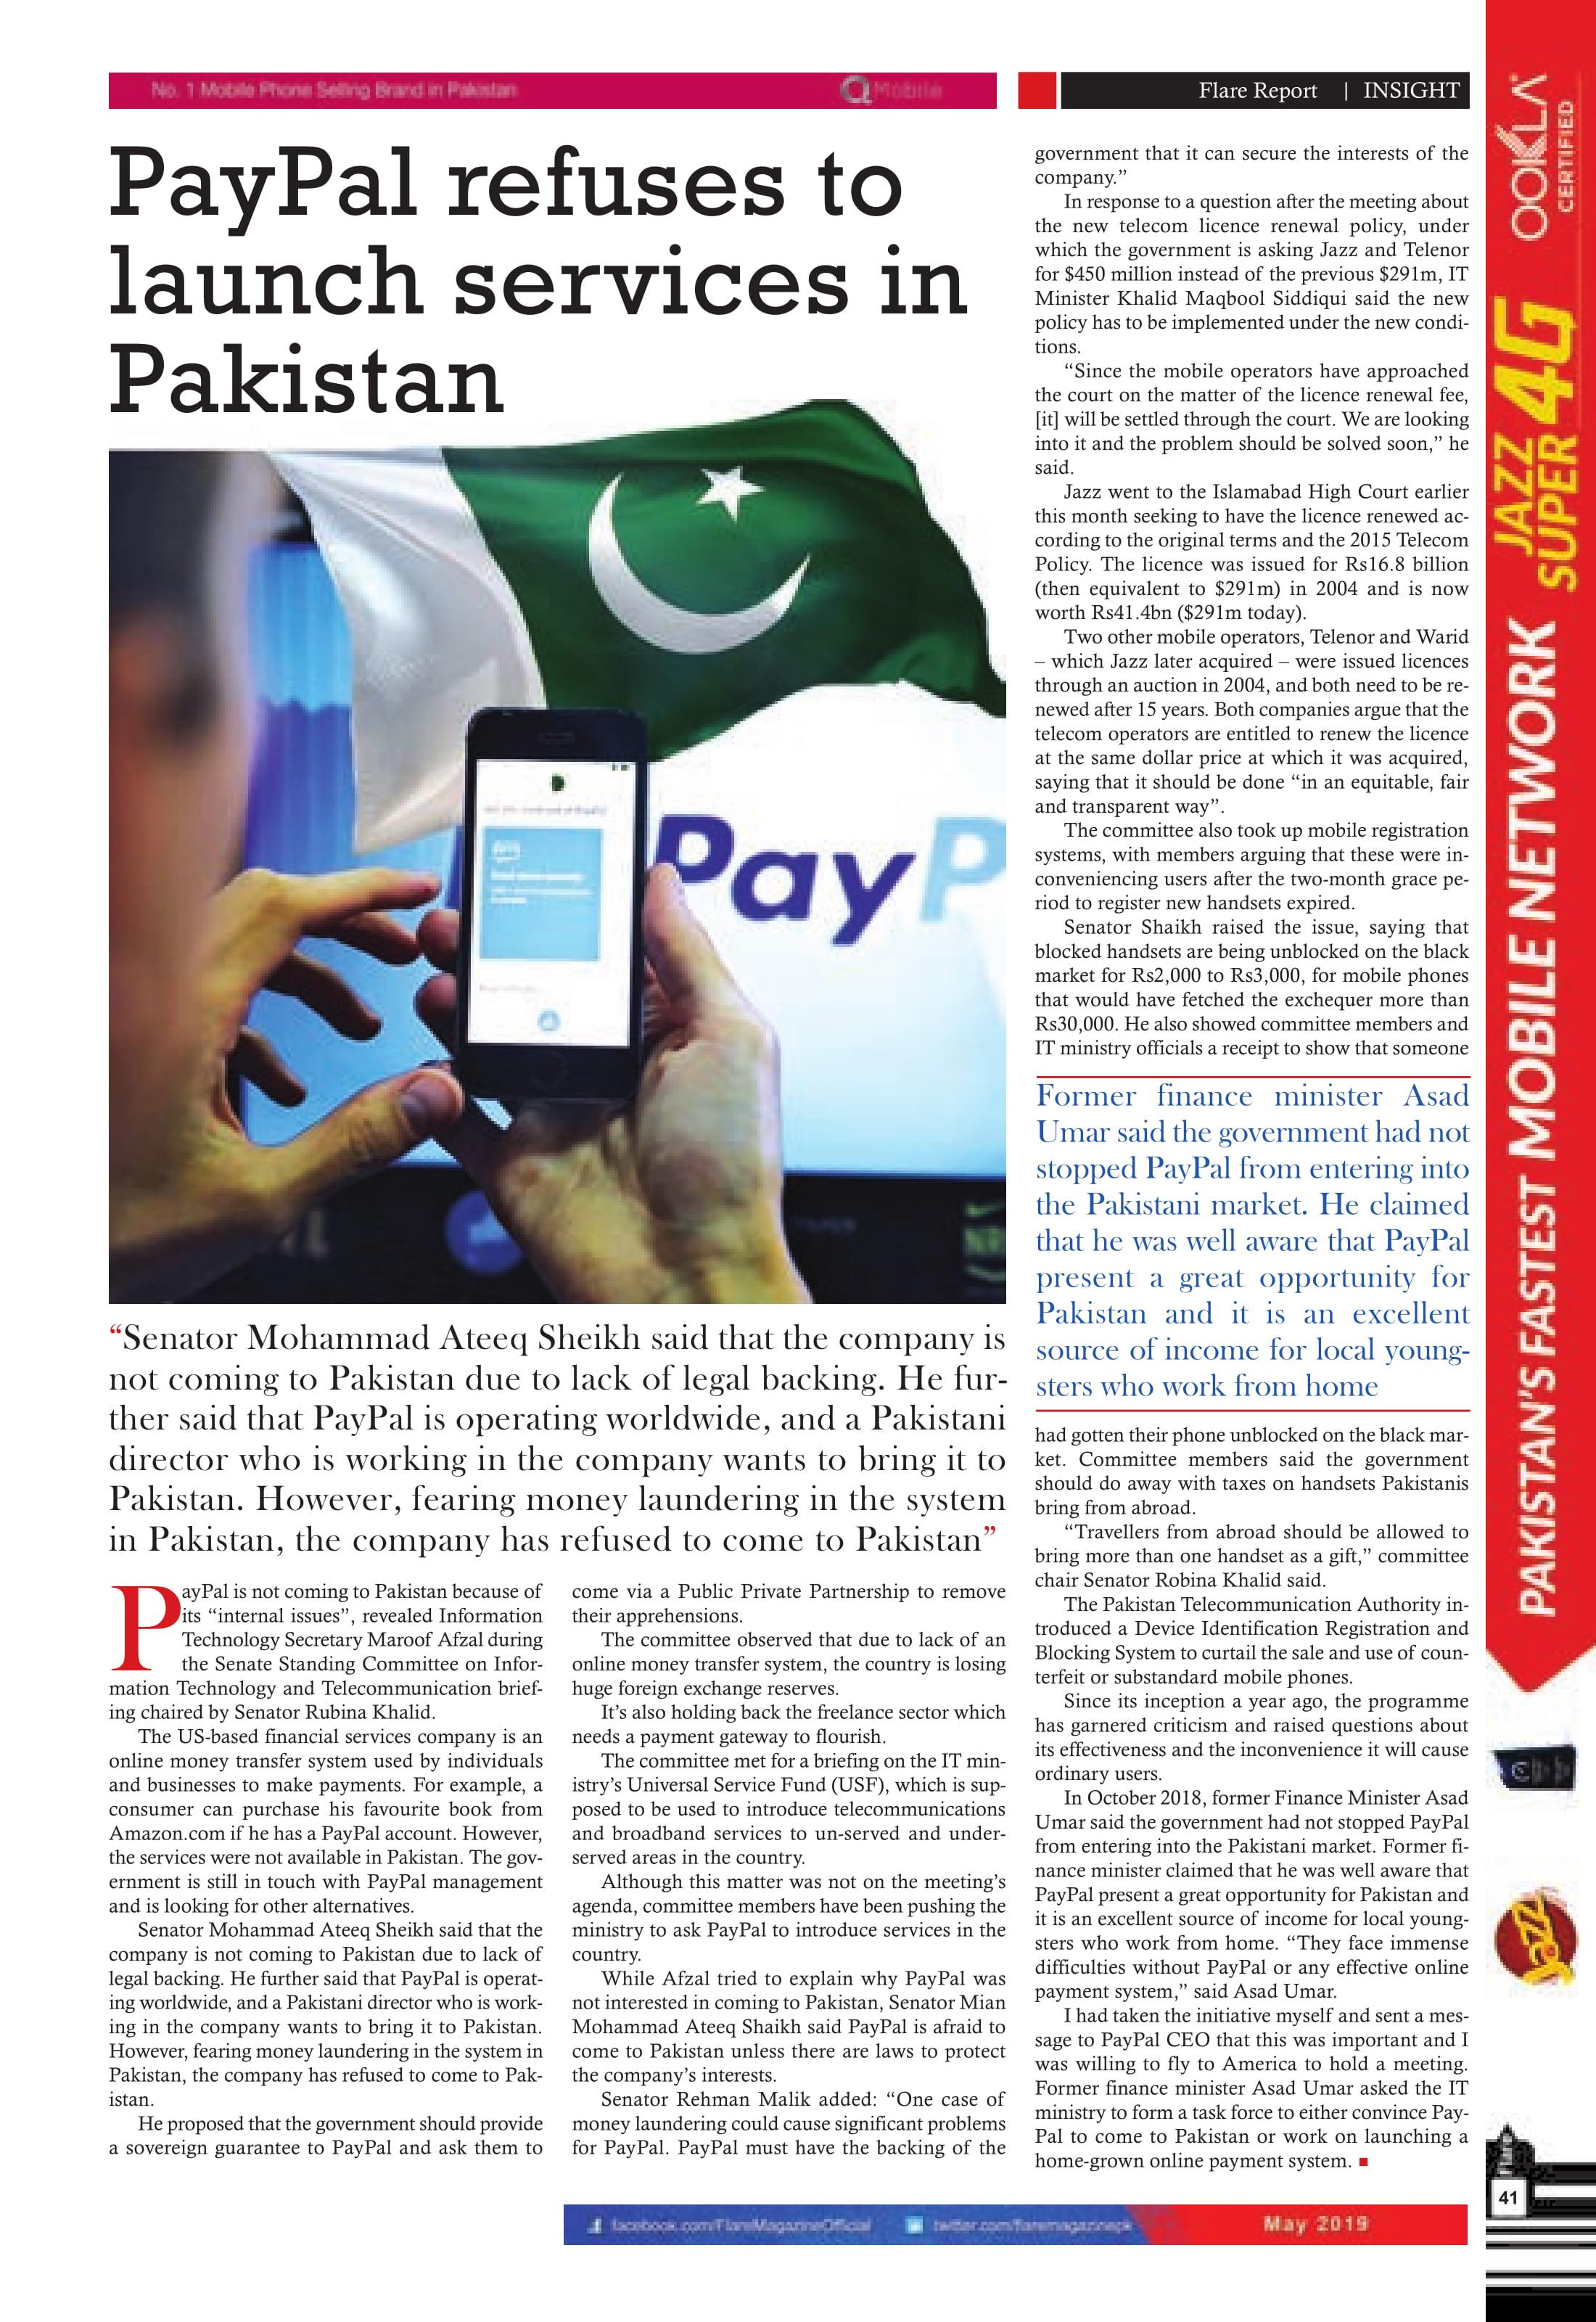 Paypal refuses to launch services in Pakistan